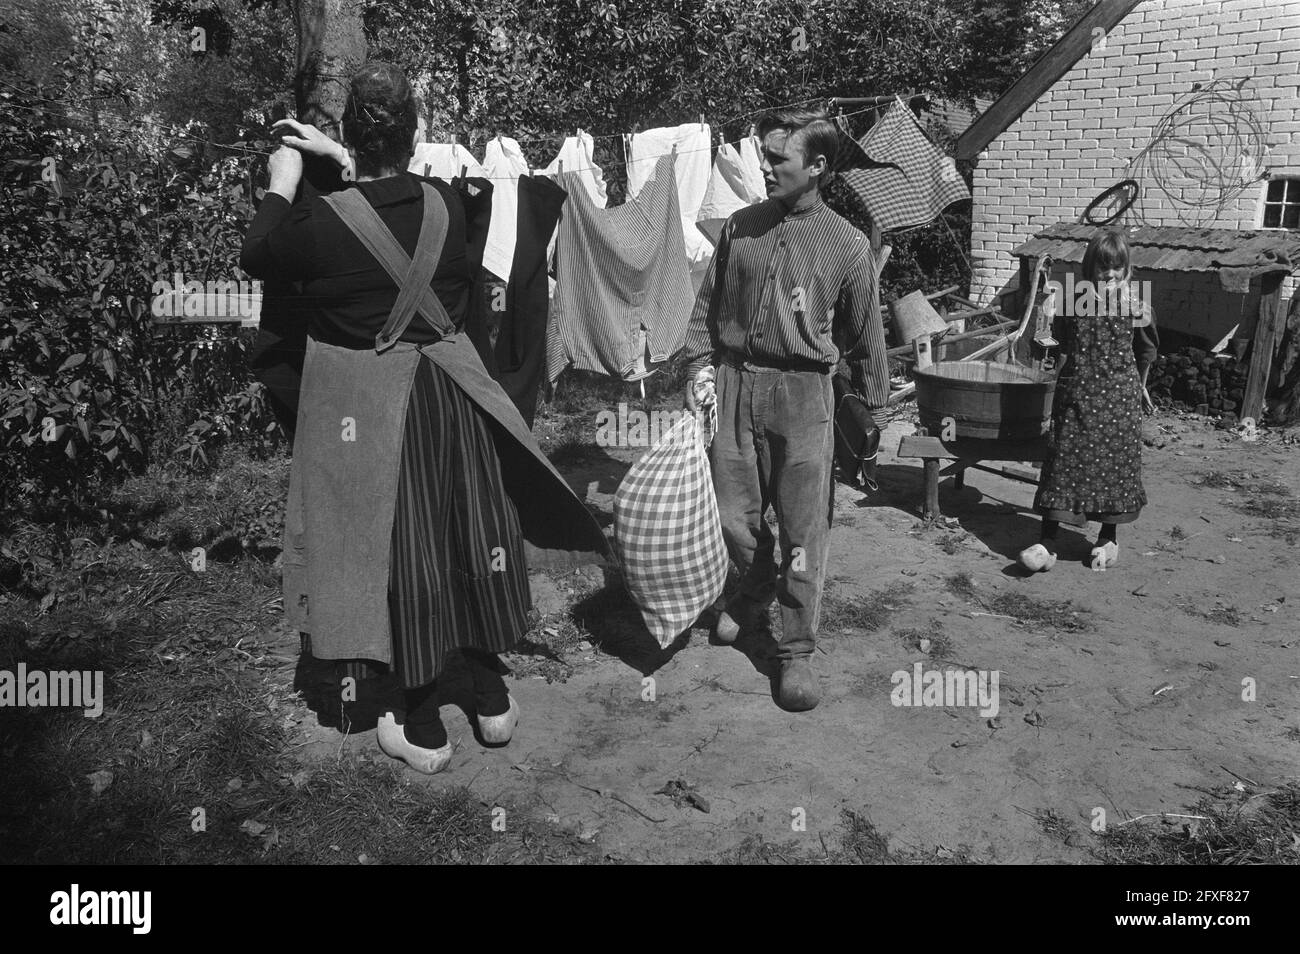 TV recordings for series Bartje, Jaap Schadenberg as Bartje with stepmother and sister at hanging laundry, August 31, 1972, TV recordings, The Netherlands, 20th century press agency photo, news to remember, documentary, historic photography 1945-1990, visual stories, human history of the Twentieth Century, capturing moments in time Stock Photo